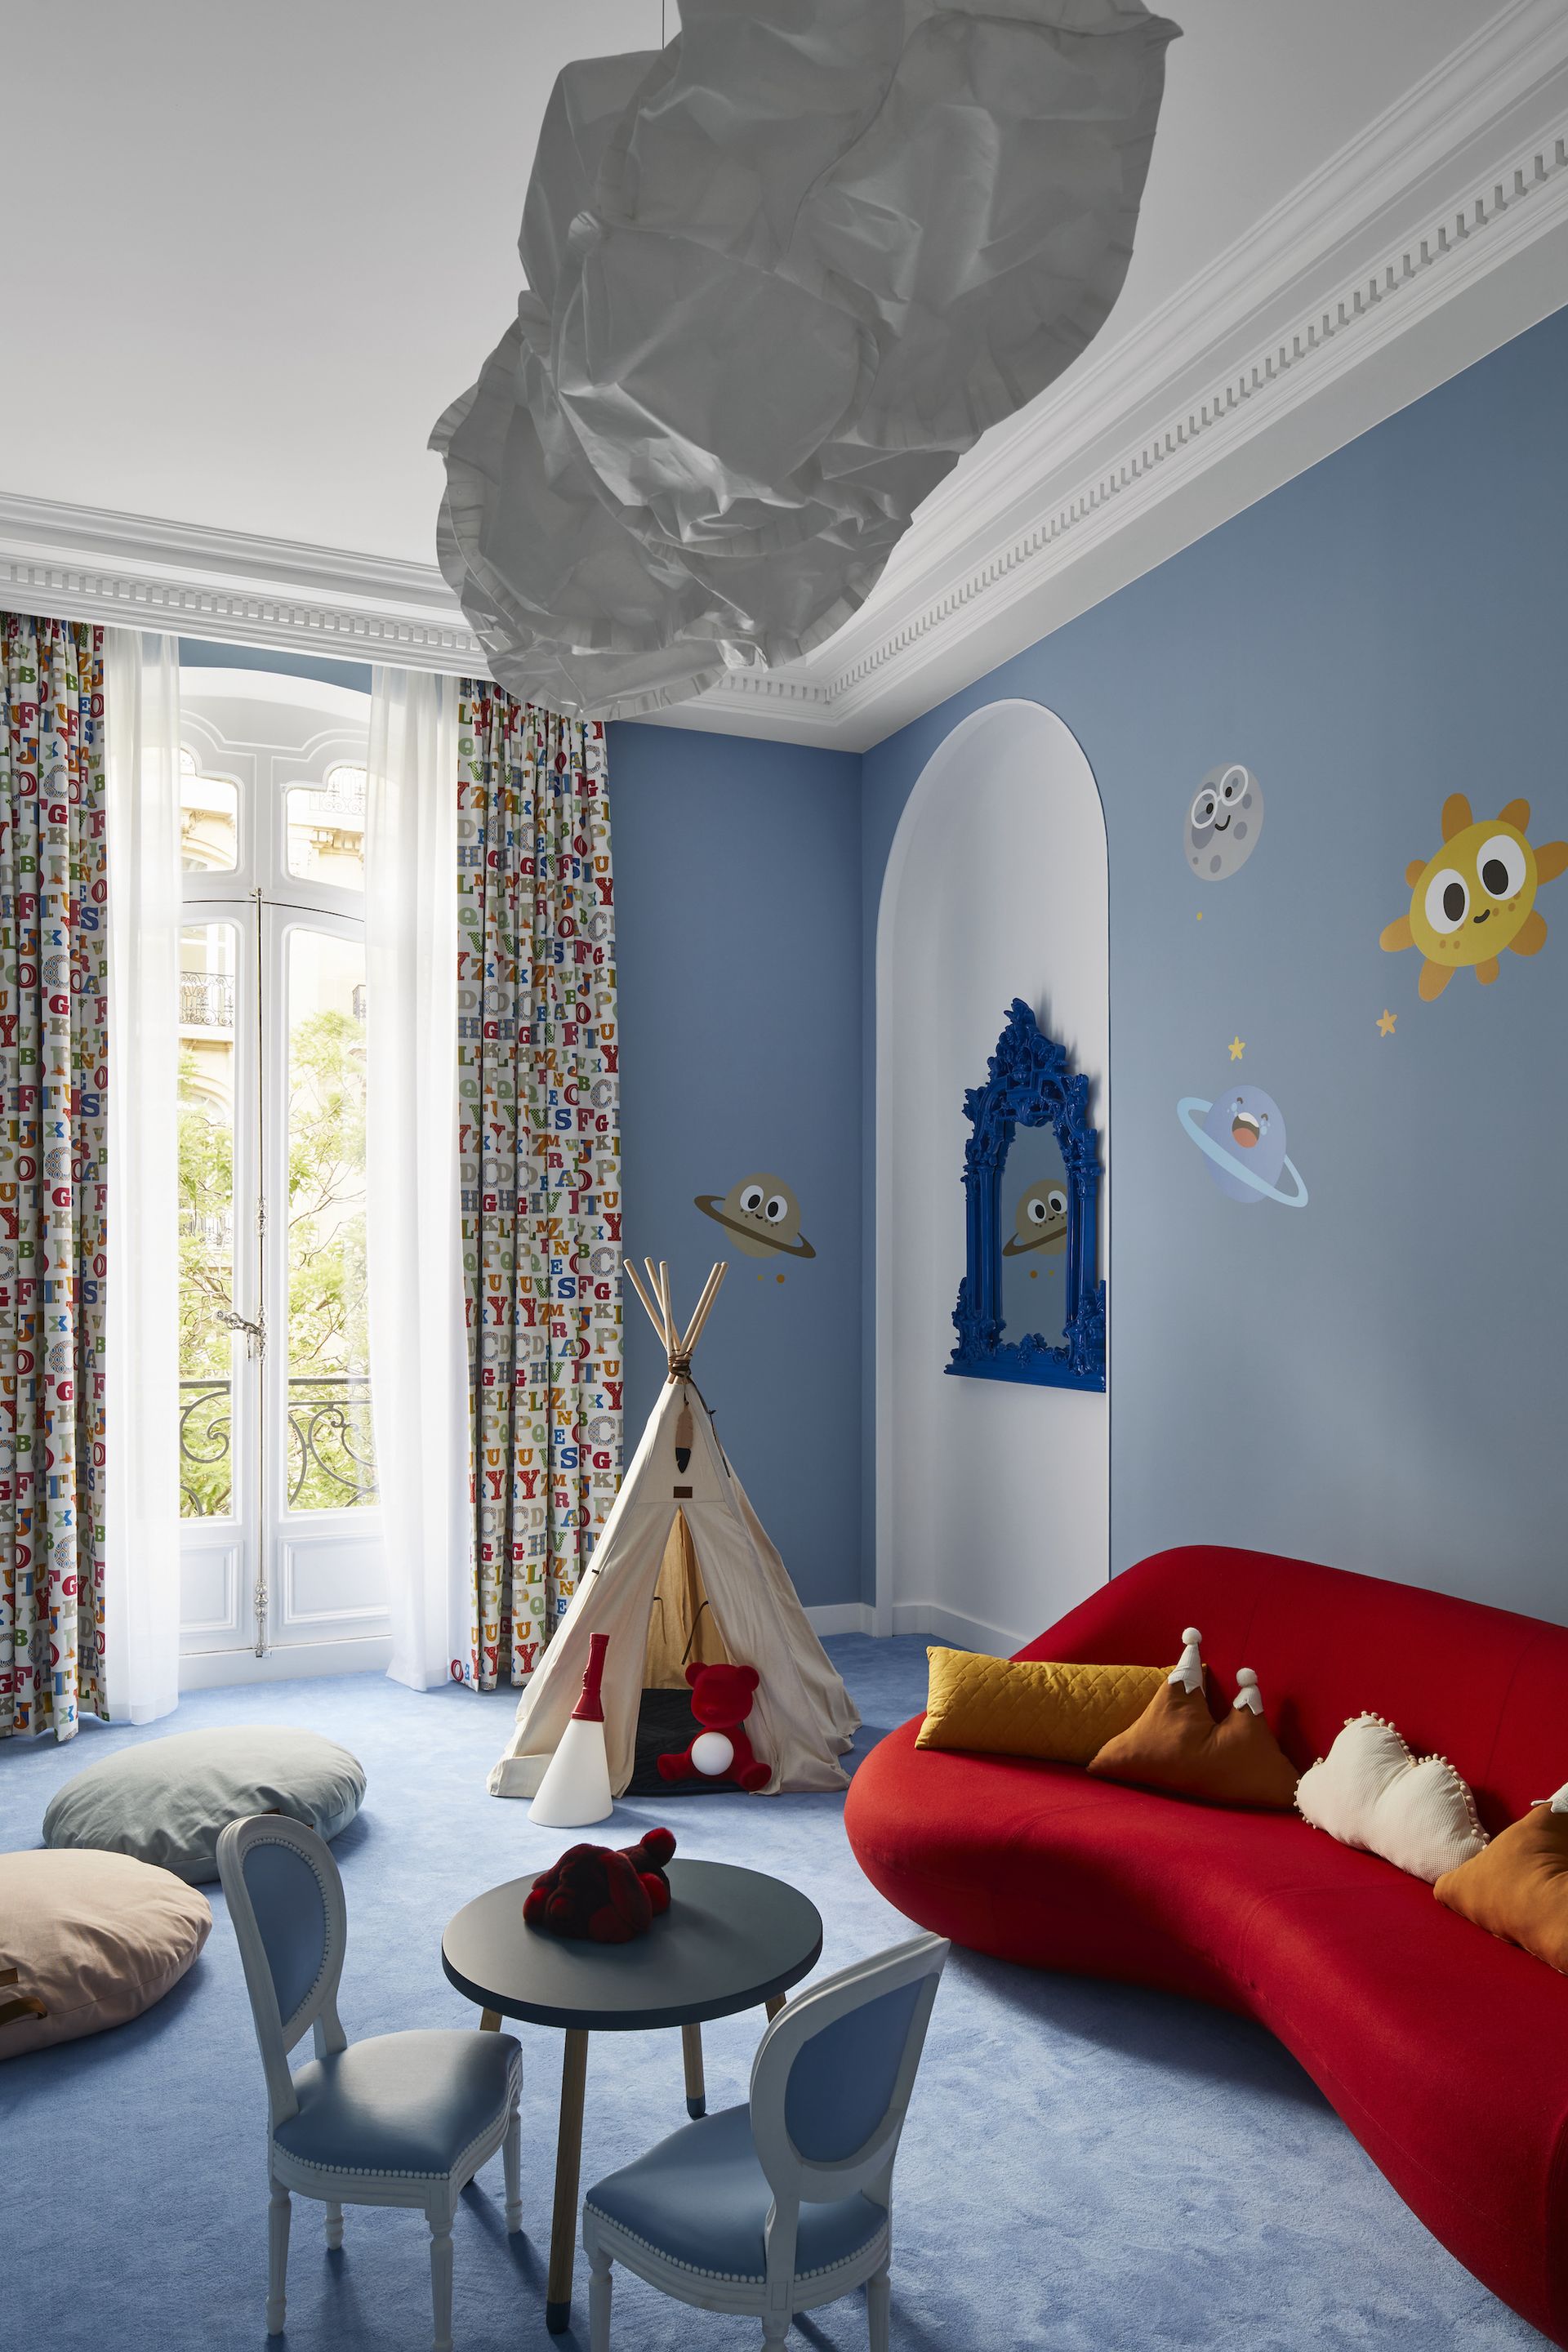 <p>                     Decorating with primary colors is tempting in playrooms, but you may want to limit their use.                   </p>                                      <p>                     'Bright colors are ideal for kids' playrooms, but their toys will provide plenty of noise in that respect, so I would advise keeping the base shade more subtle – a calming blue will keep the room feeling calm. Then, you can add pops of primary colors and pull the scheme together with drapes that have multiple colors,' says Lucy Searle, global editor in chief, <em>Homes & Gardens.</em>                   </p>